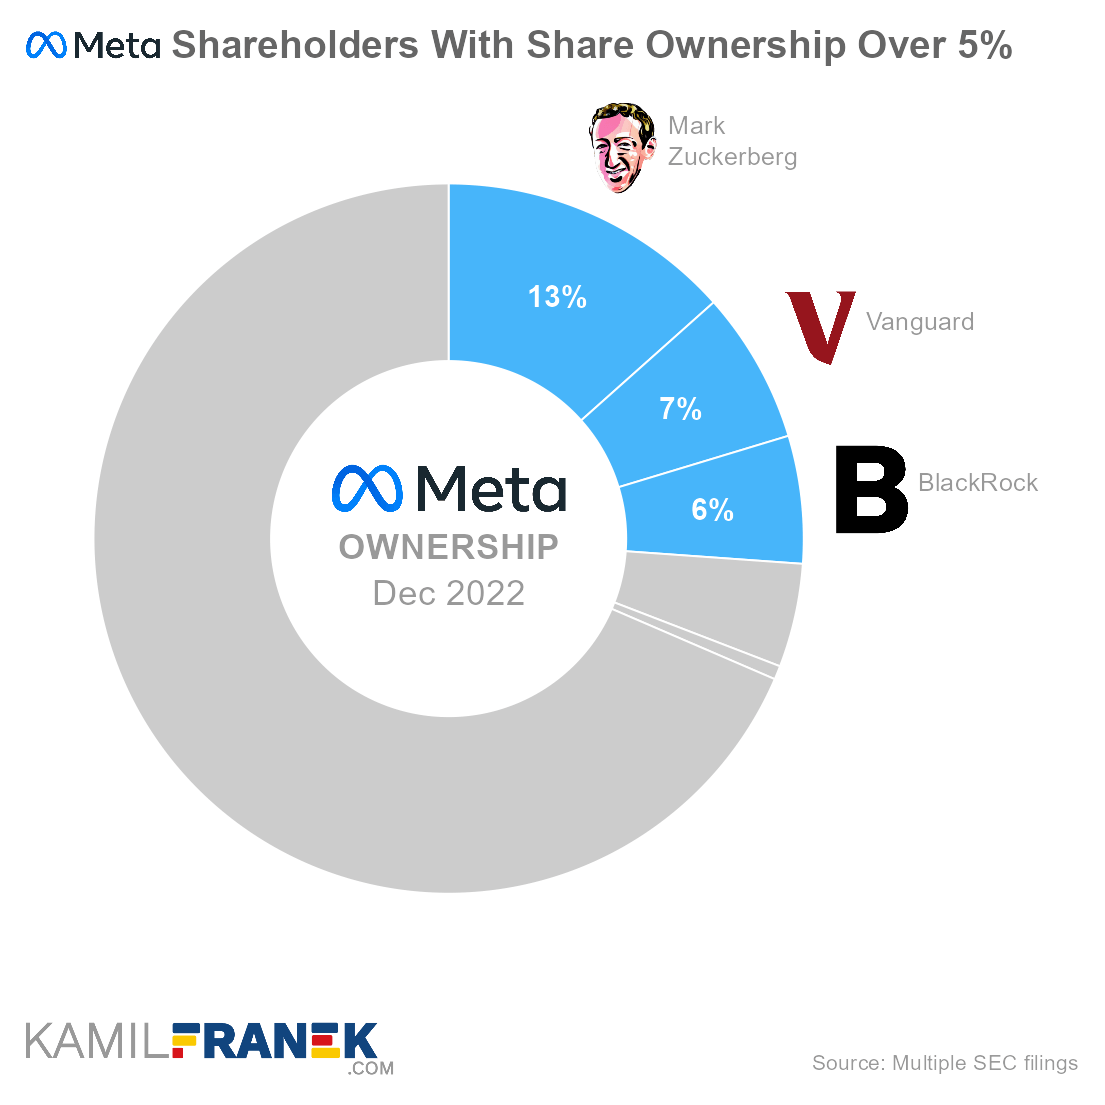 Meta largest shareholders by share ownership and vote control (donut chart)